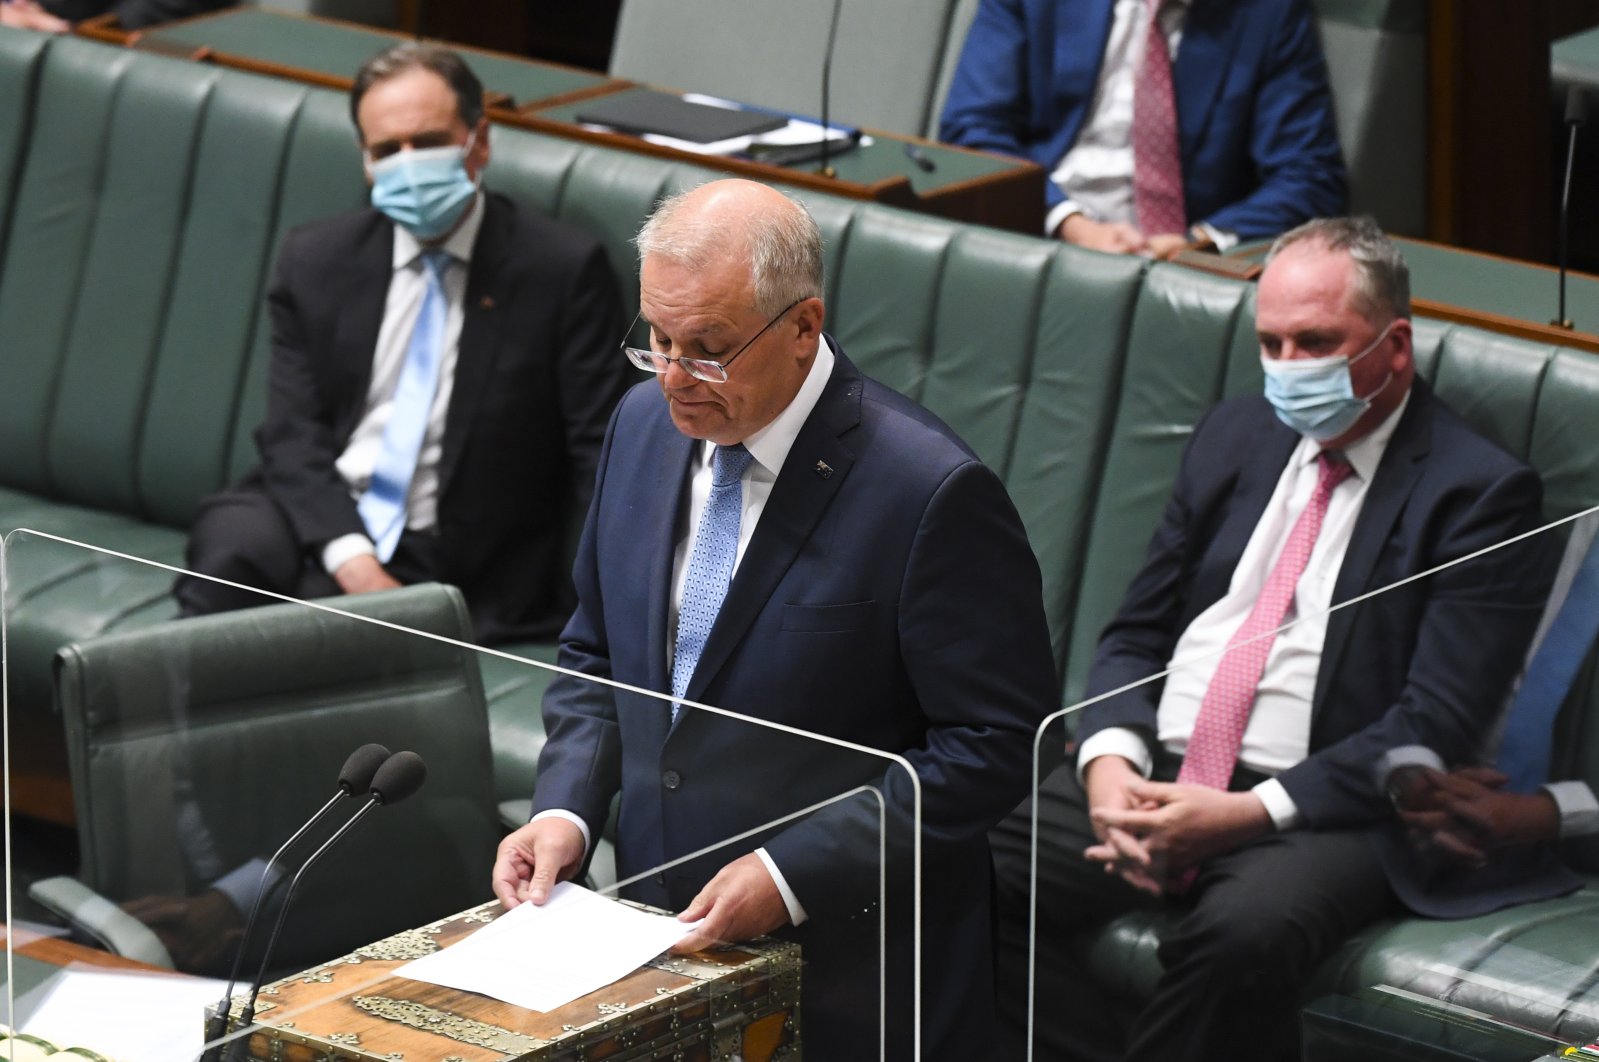 Australian Prime Minister Scott Morrison speaks to a statement of acknowledgment of harassment in the workplace of Commonwealth Parliament by the Speaker in the House of Representatives at Parliament House in Canberra, Australia, Feb. 8, 2022. (EPA PHOTO)